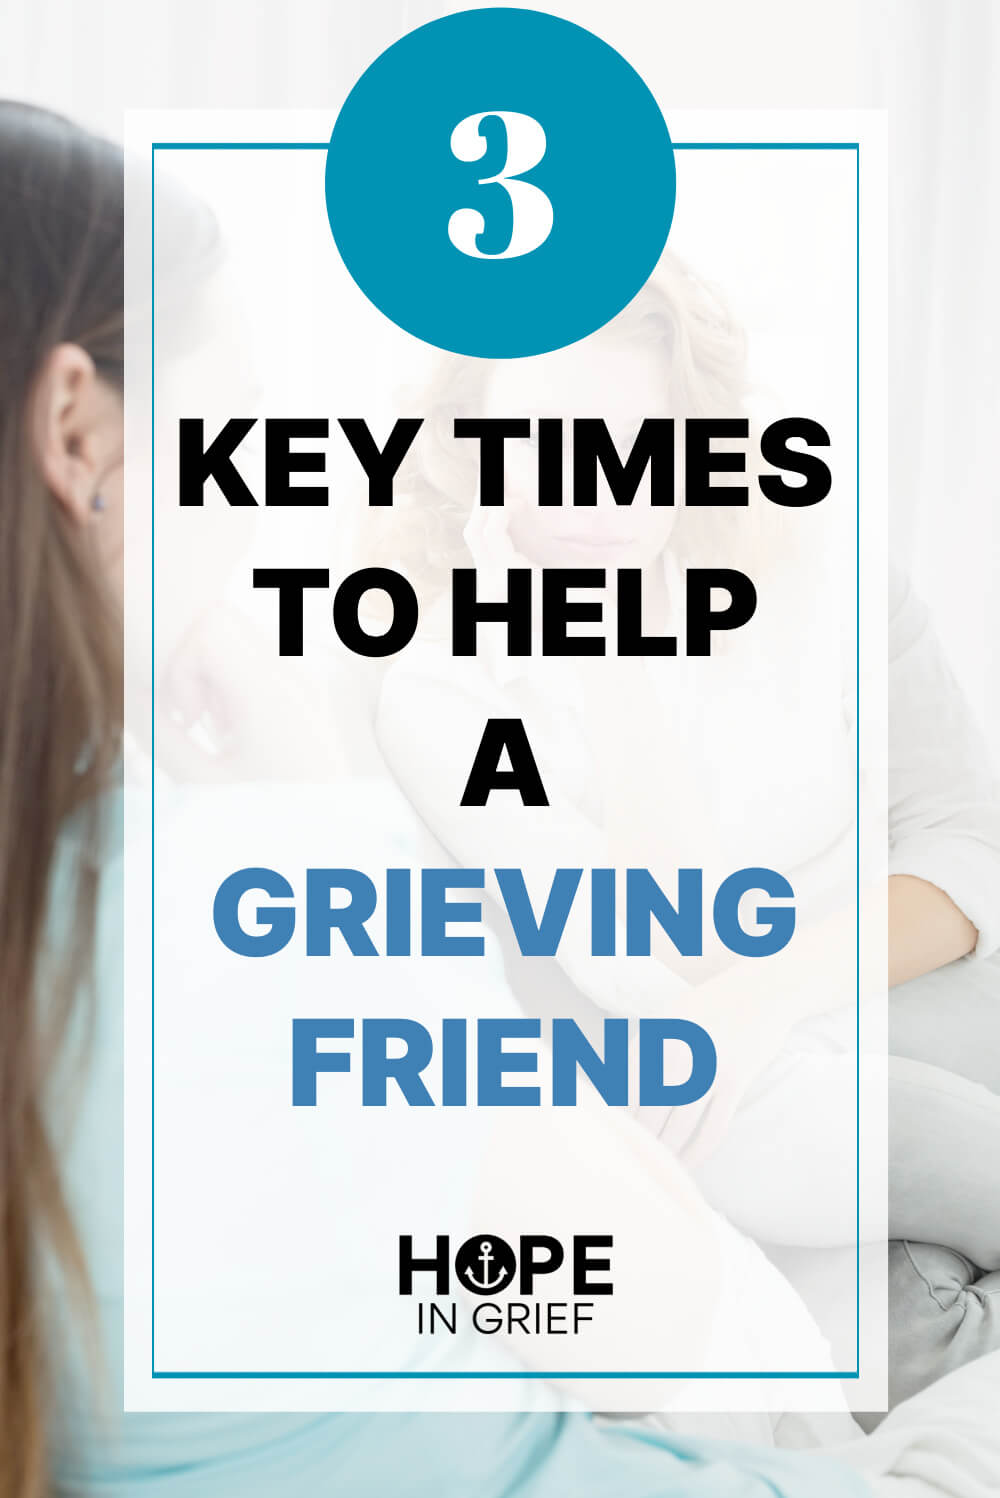 3 Key Times to Help a Grieving Friend